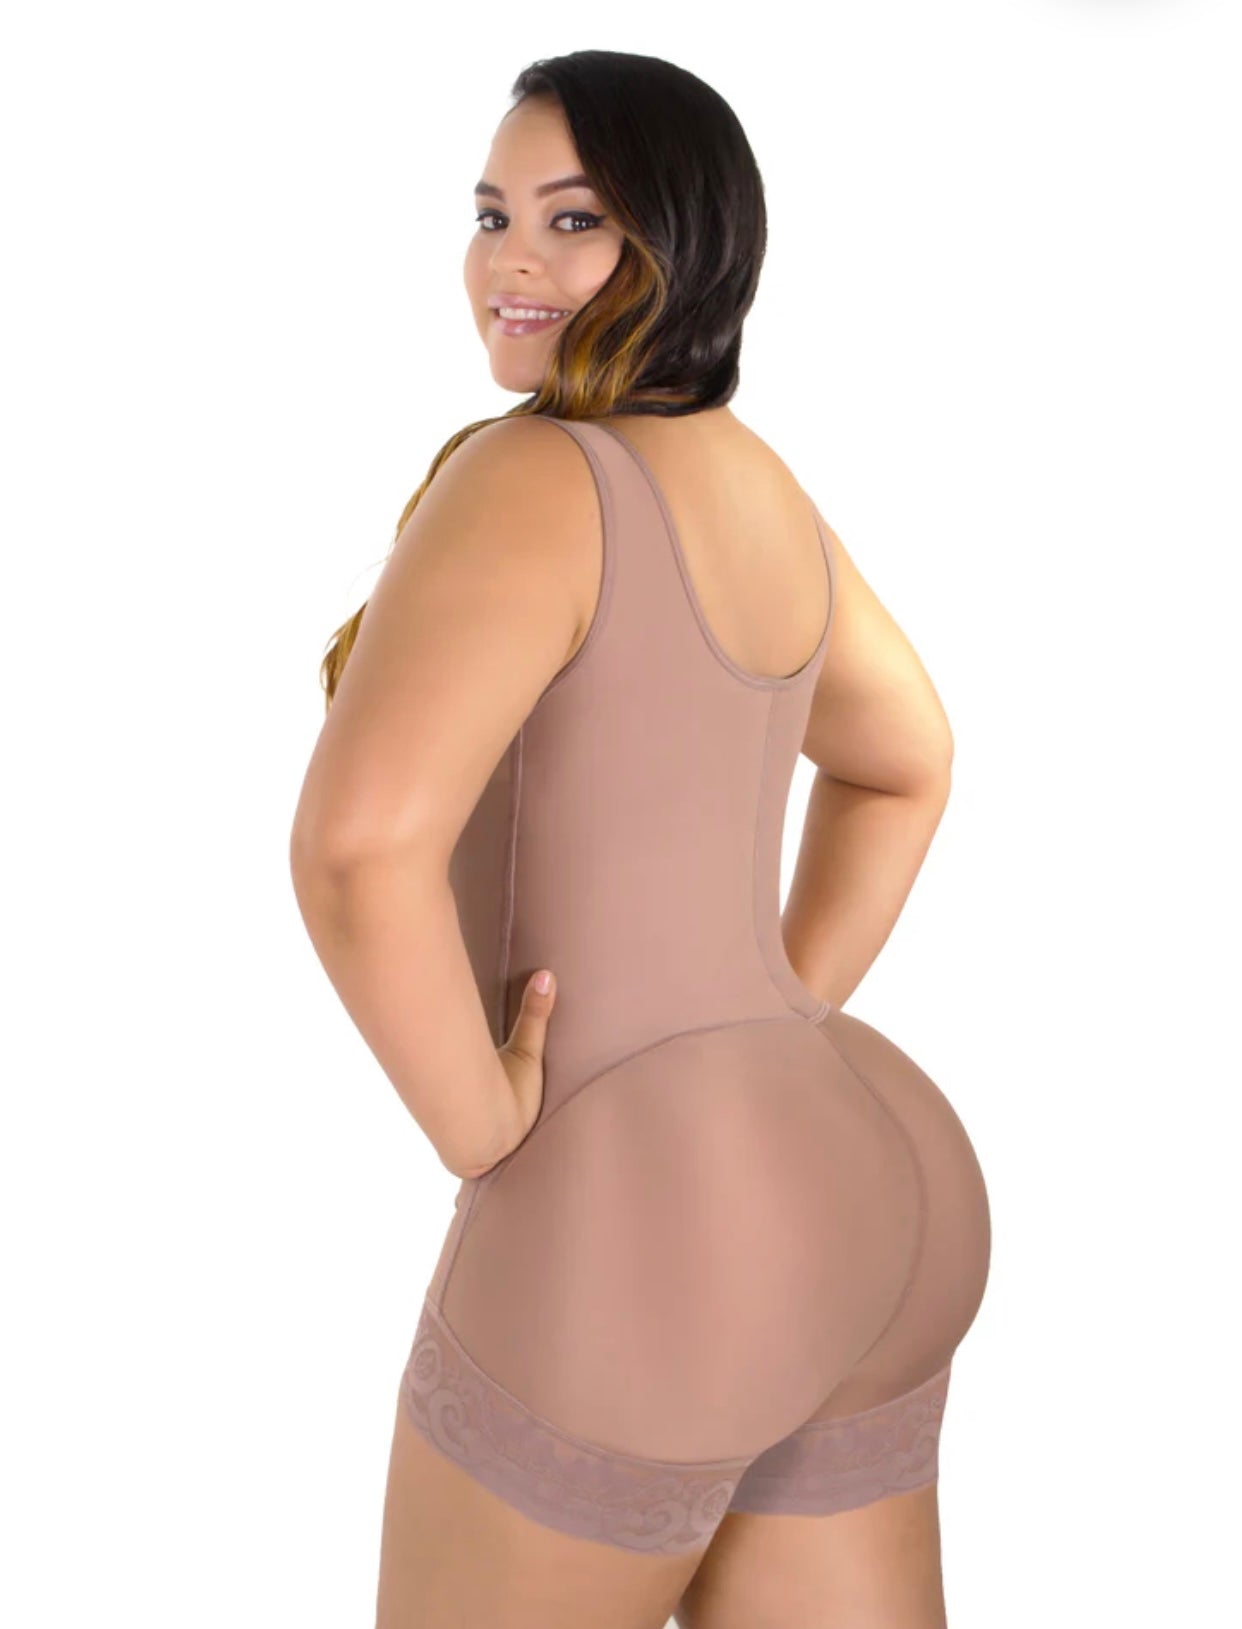 REF 109 LUZ by Gama Alta  (STAGE 2/ETAPA 2)- EVERYDAY WEAR MOLDING SHAPEWEAR - RECOMMENDED FOR POST OP/LIPO - RECOMMENDED FOR BBL (FAT TRANSFER) - POST PARTUM